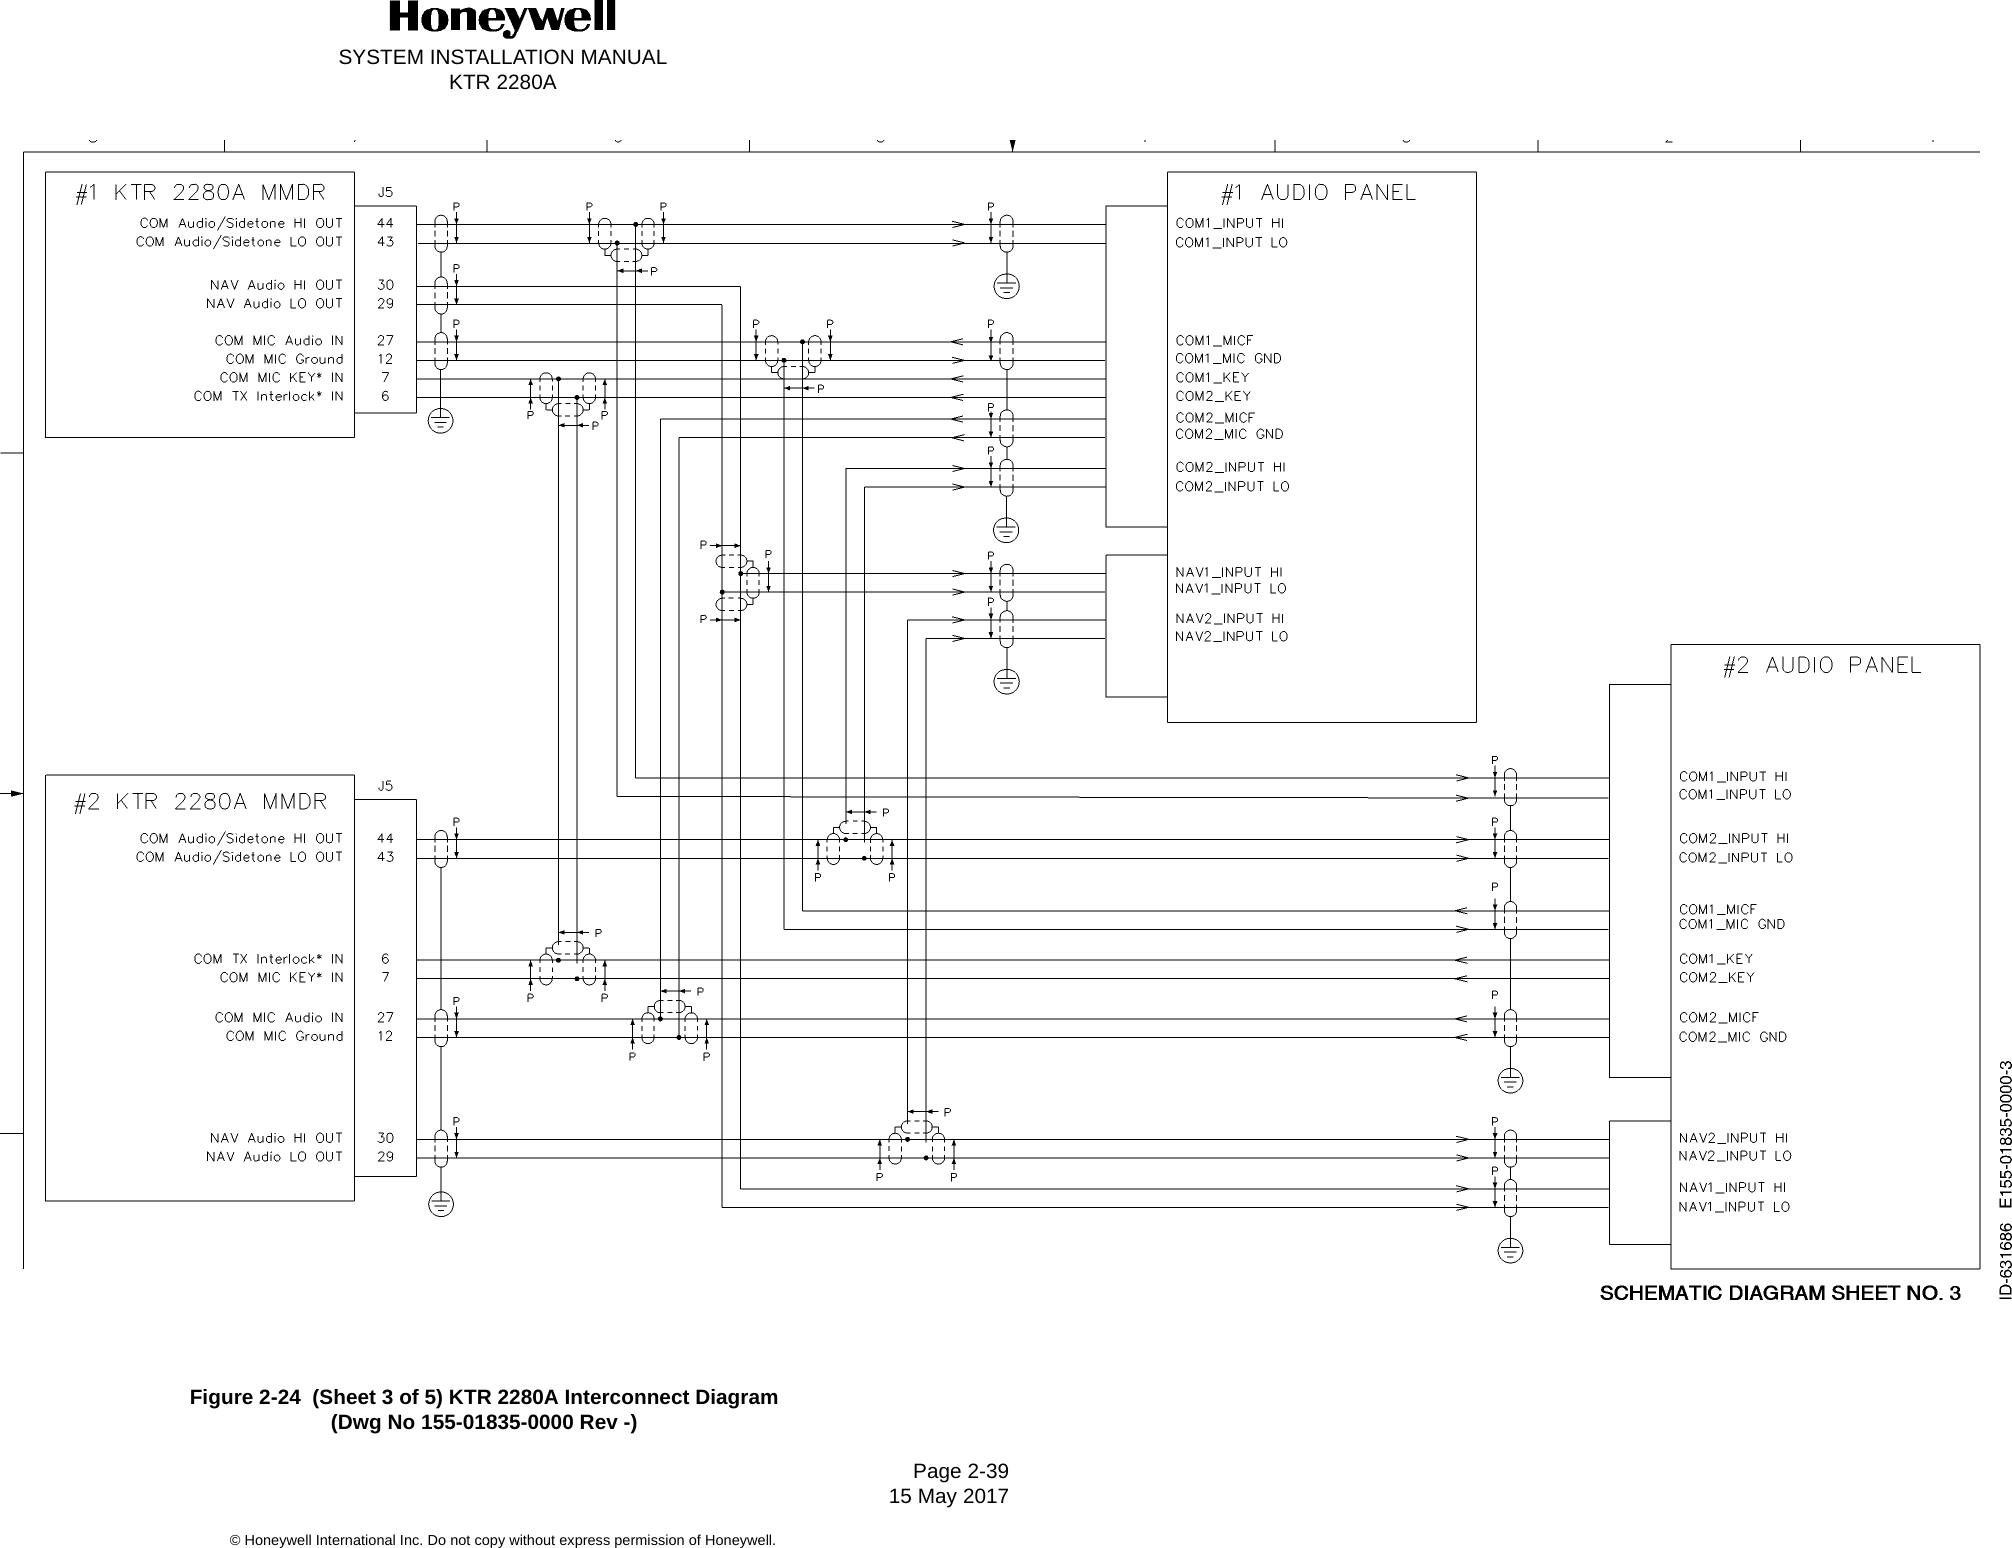 SYSTEM INSTALLATION MANUALKTR 2280APage 2-39 15 May 2017© Honeywell International Inc. Do not copy without express permission of Honeywell.Figure 2-24  (Sheet 3 of 5) KTR 2280A Interconnect Diagram(Dwg No 155-01835-0000 Rev -)